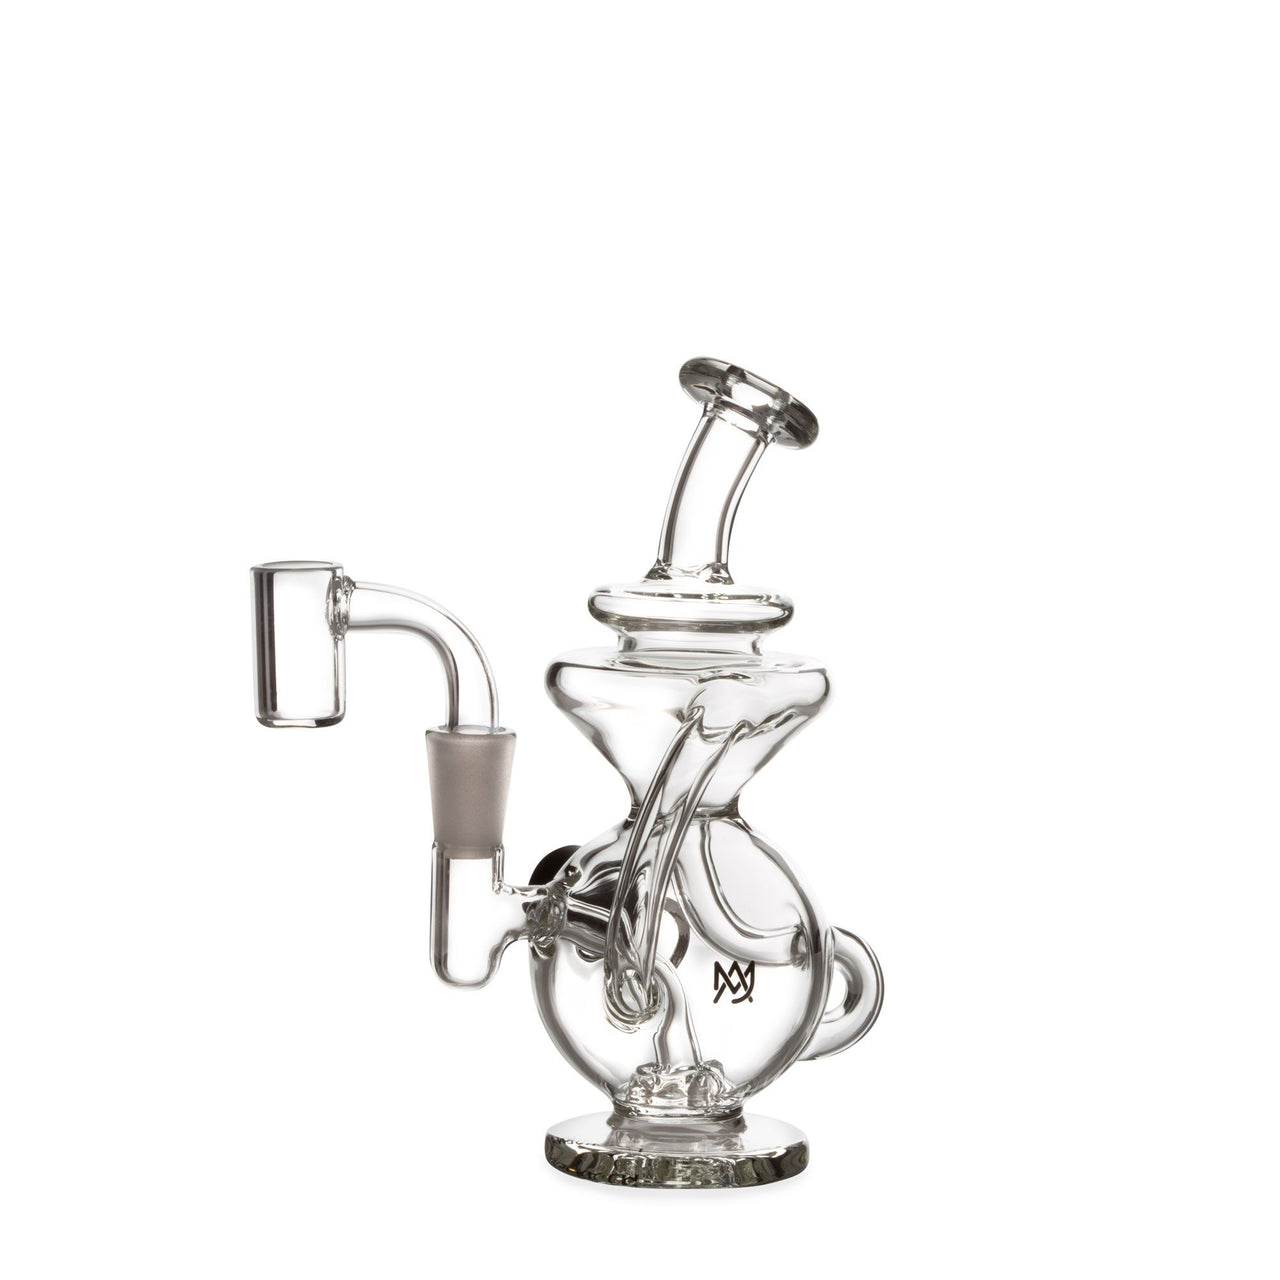 Mj Arsenal 'Mini Jig' Built-In-Container Mini Recycler Rig